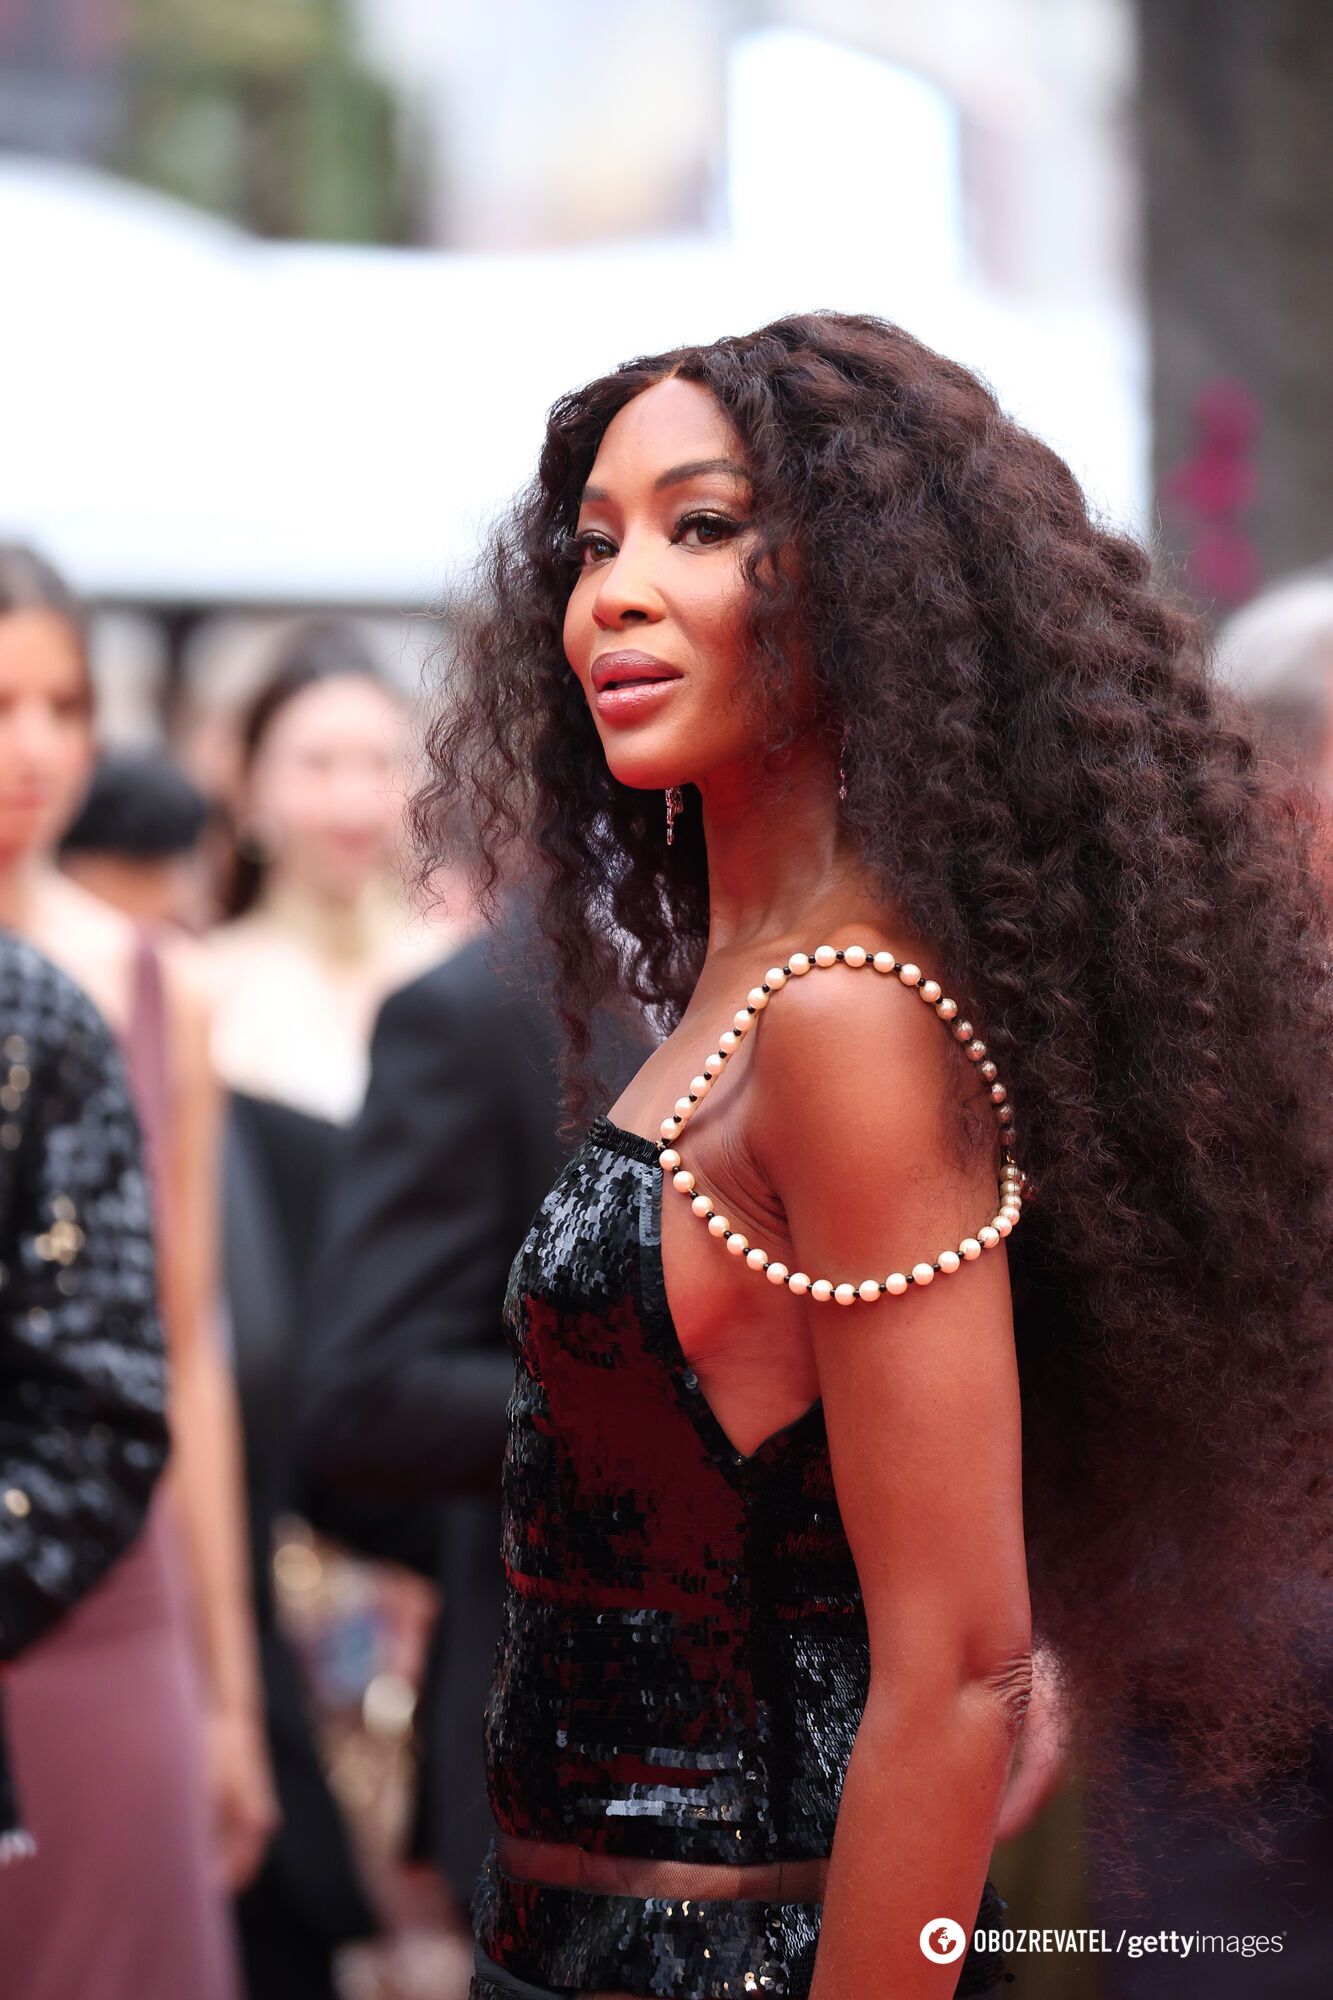 Naomi Campbell took to the red carpet in a dress she wore 28 years ago. Photos then and now